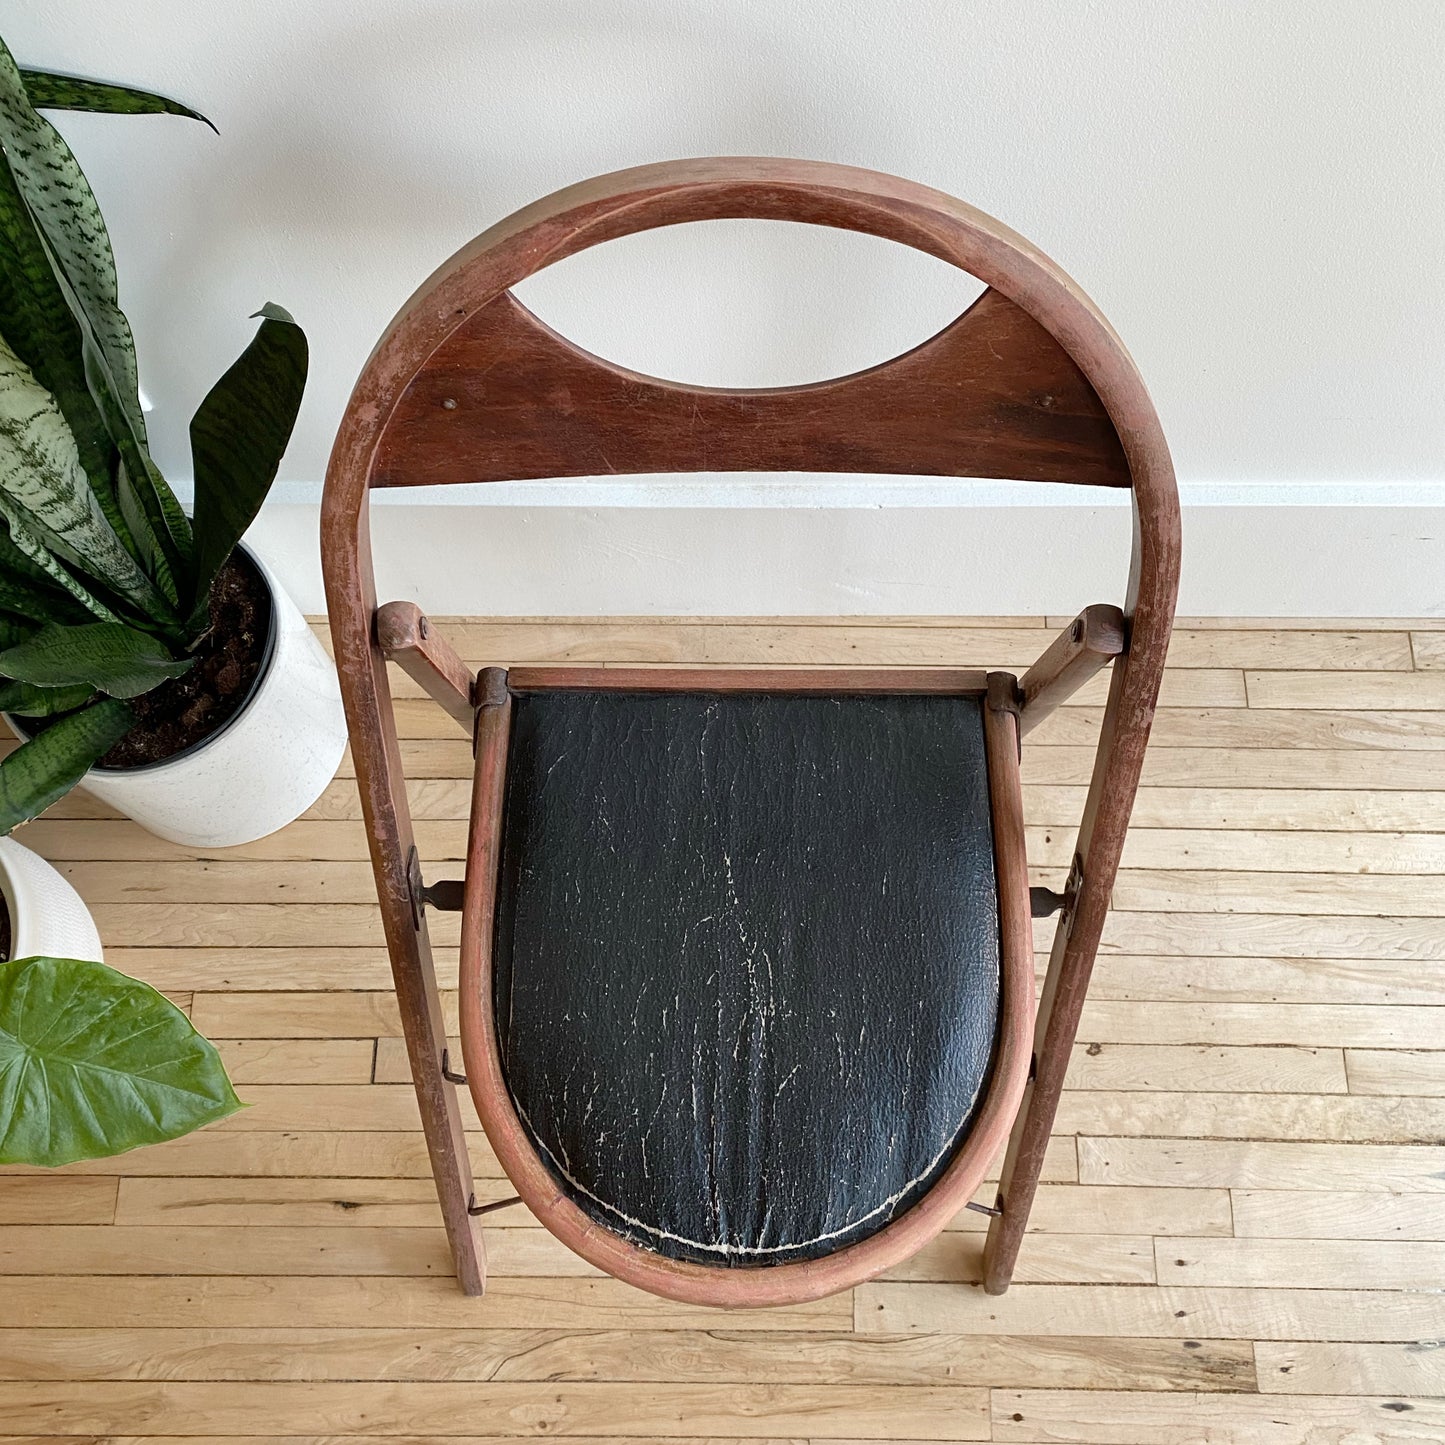 Vintage 1930’s Folding Chair with Black Seat